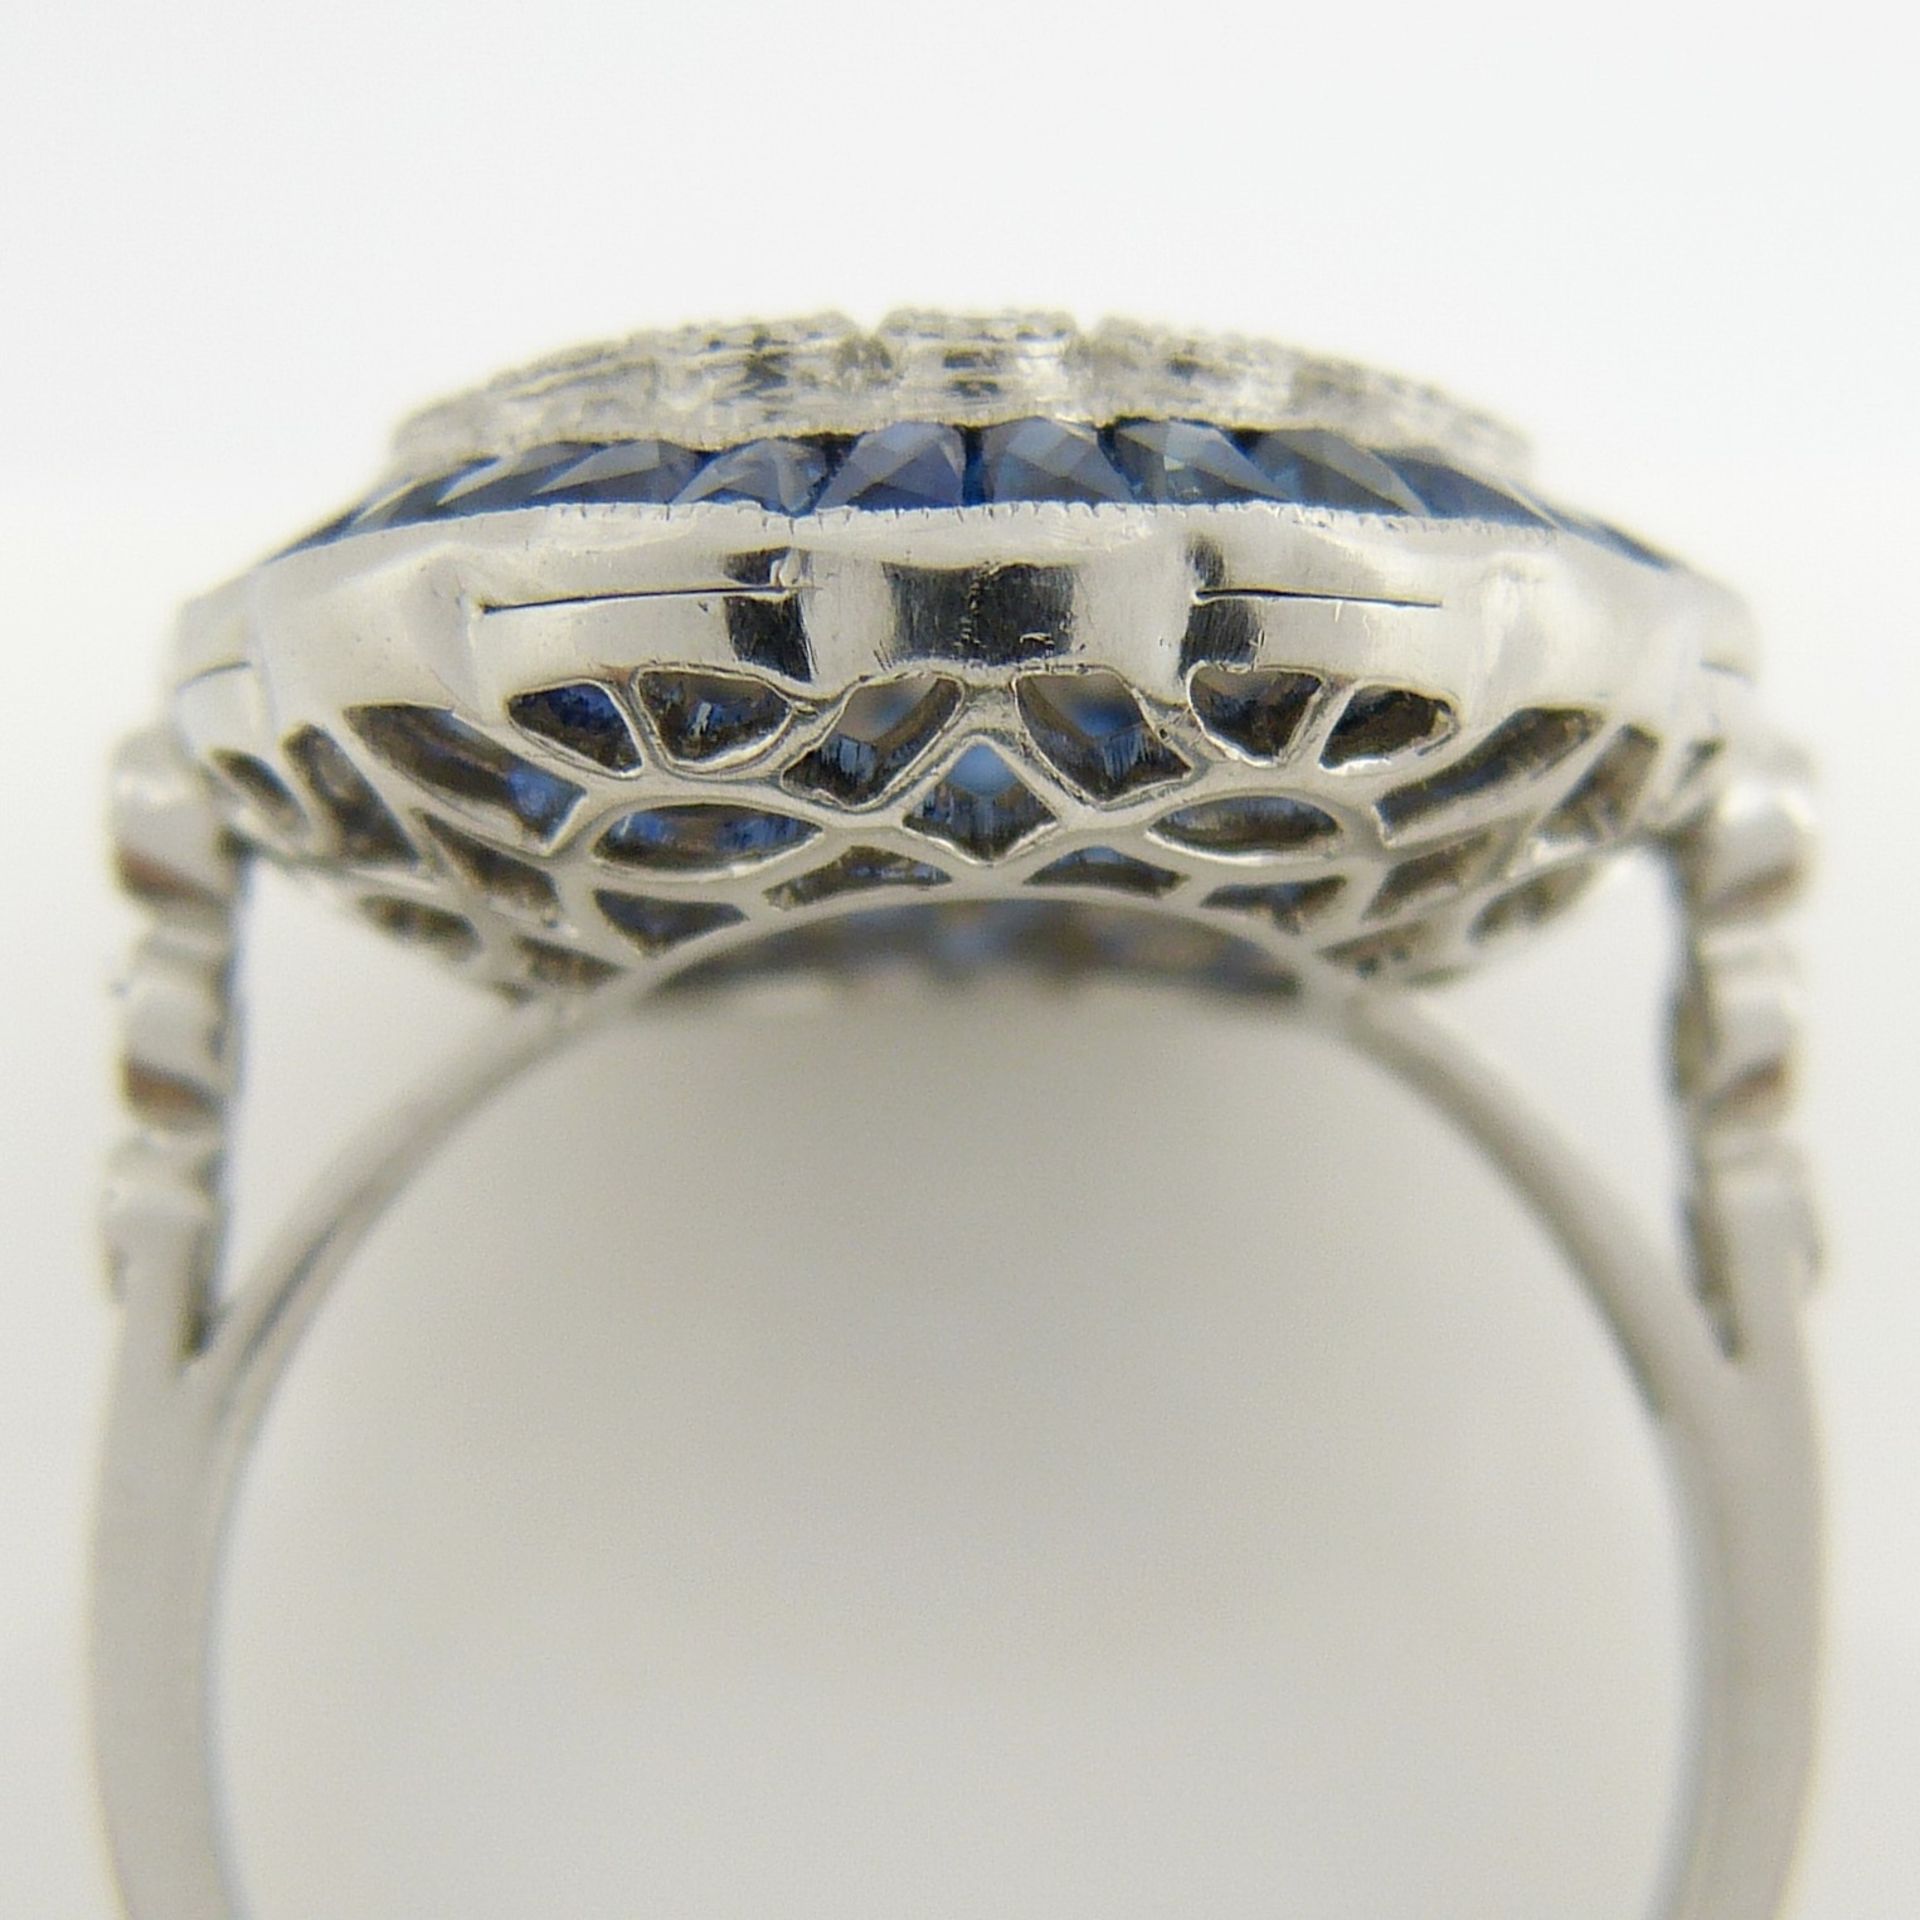 A large platinum floral-style diamond and sapphire cocktail ring - Image 7 of 7